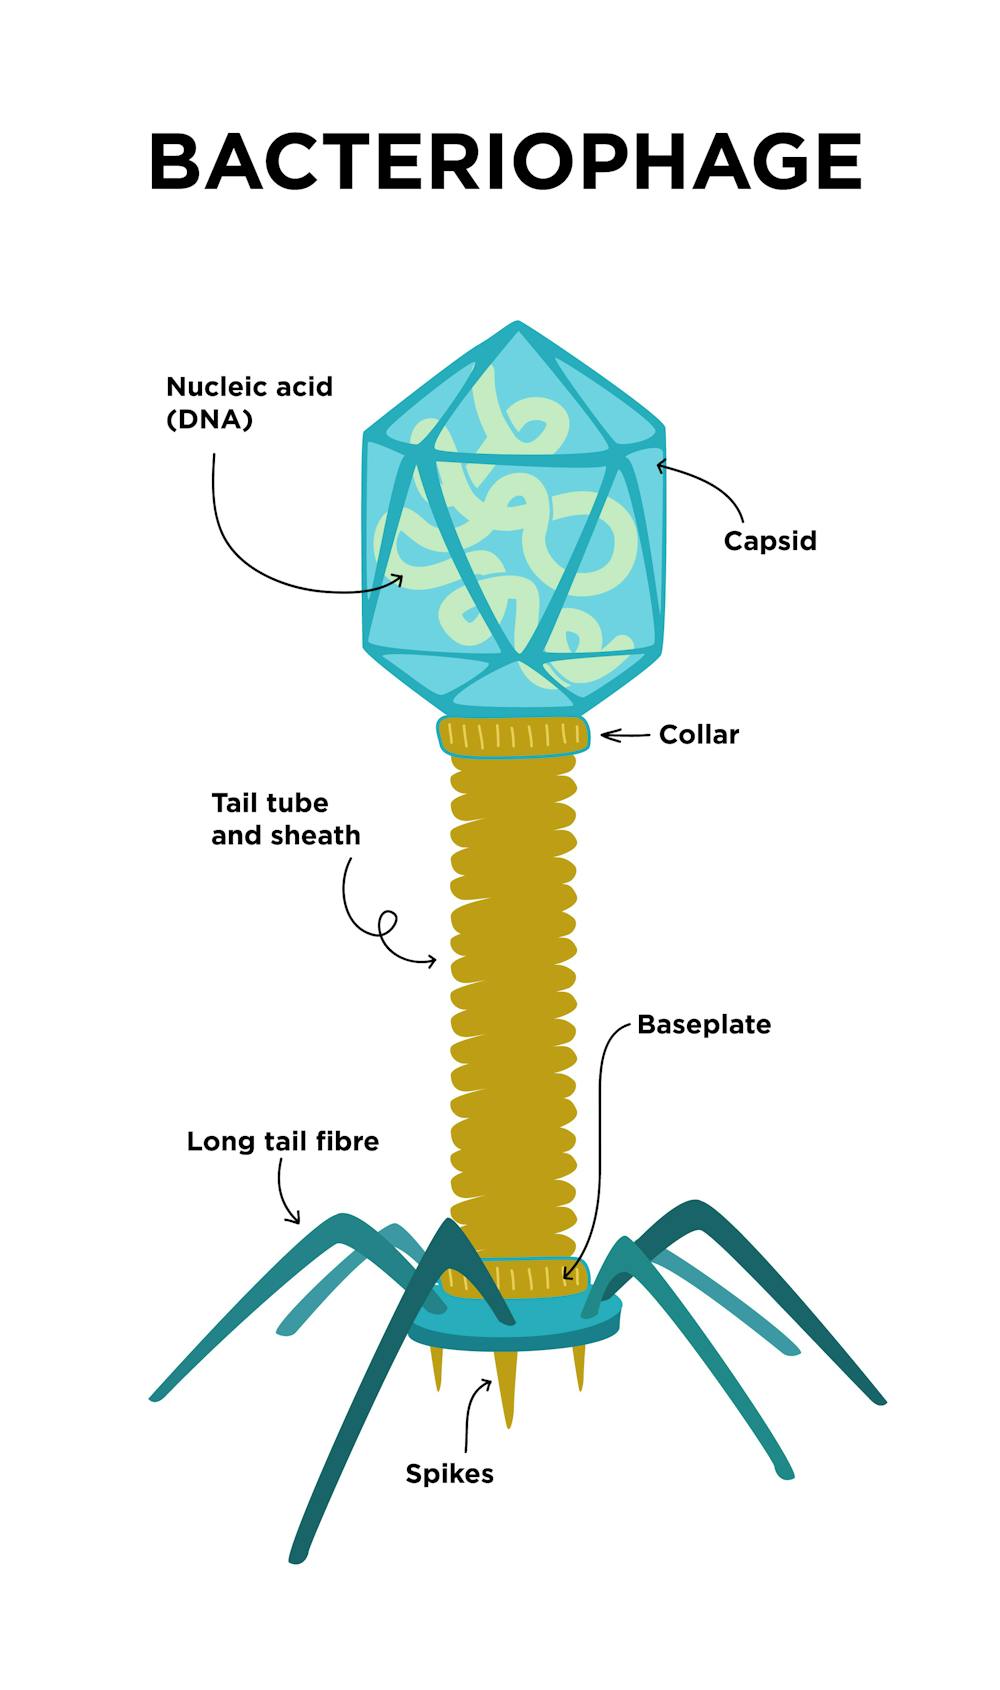 What are Bacteriophages?